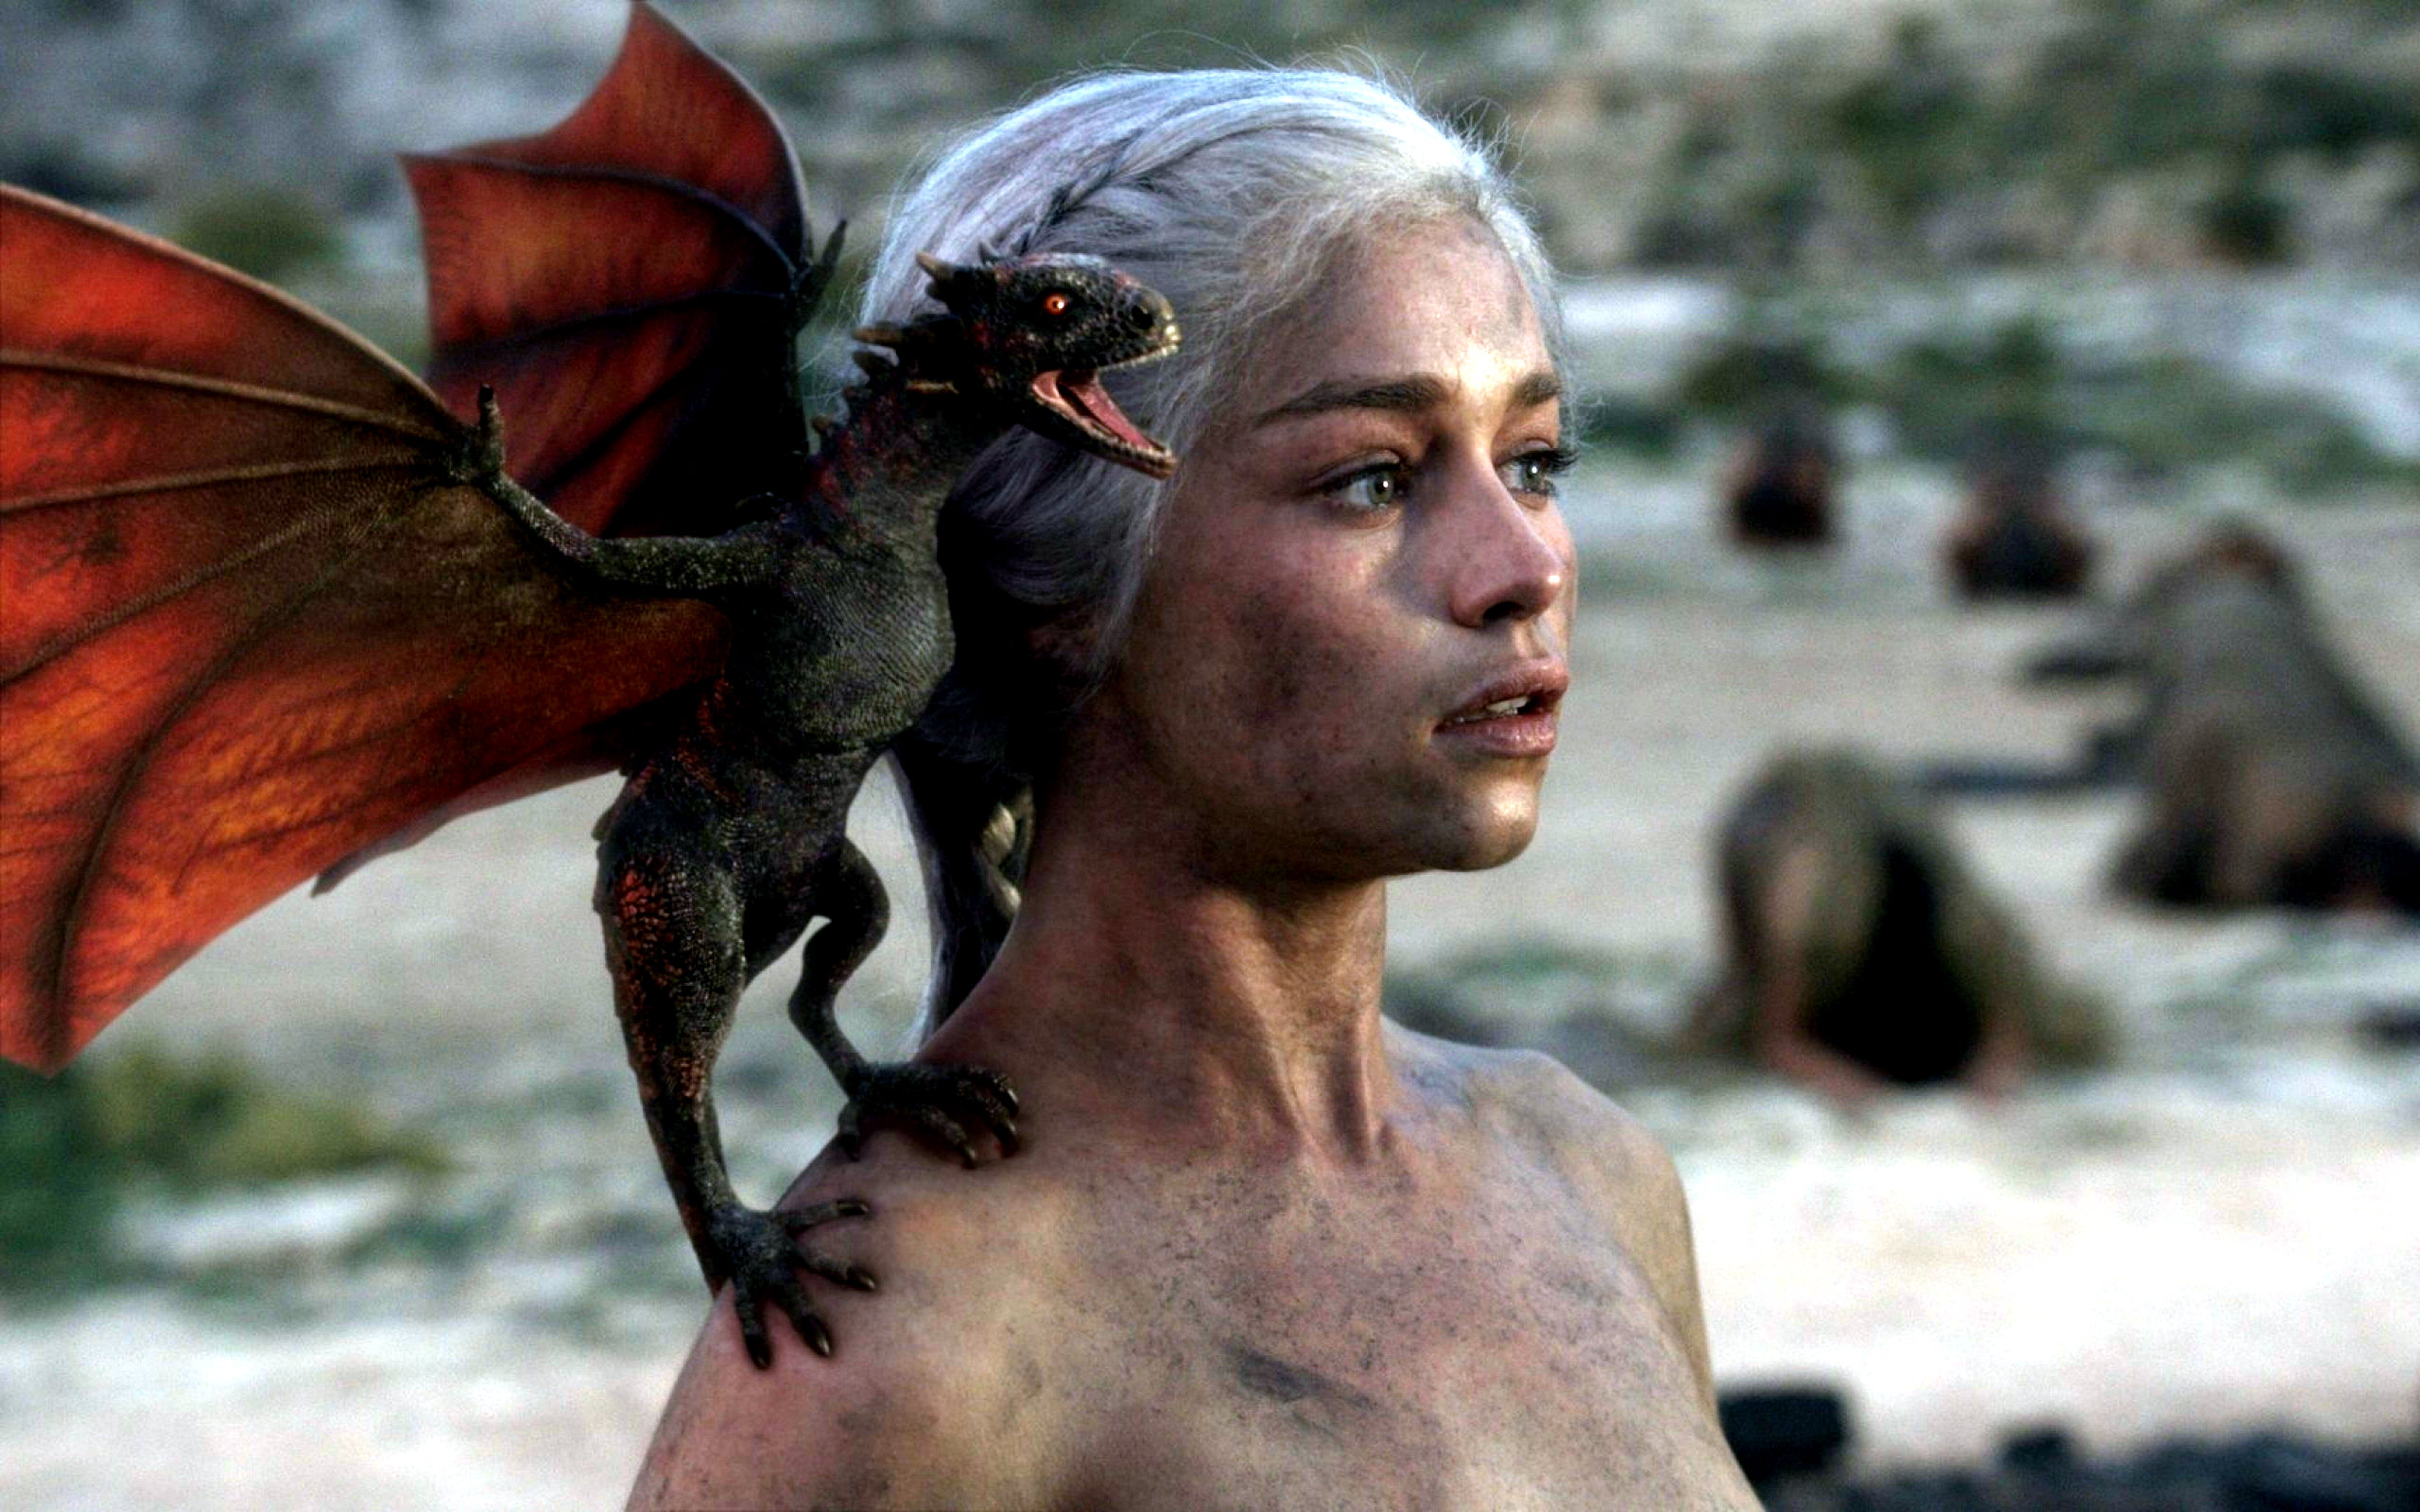 Daenerys and newly-hatched dragon